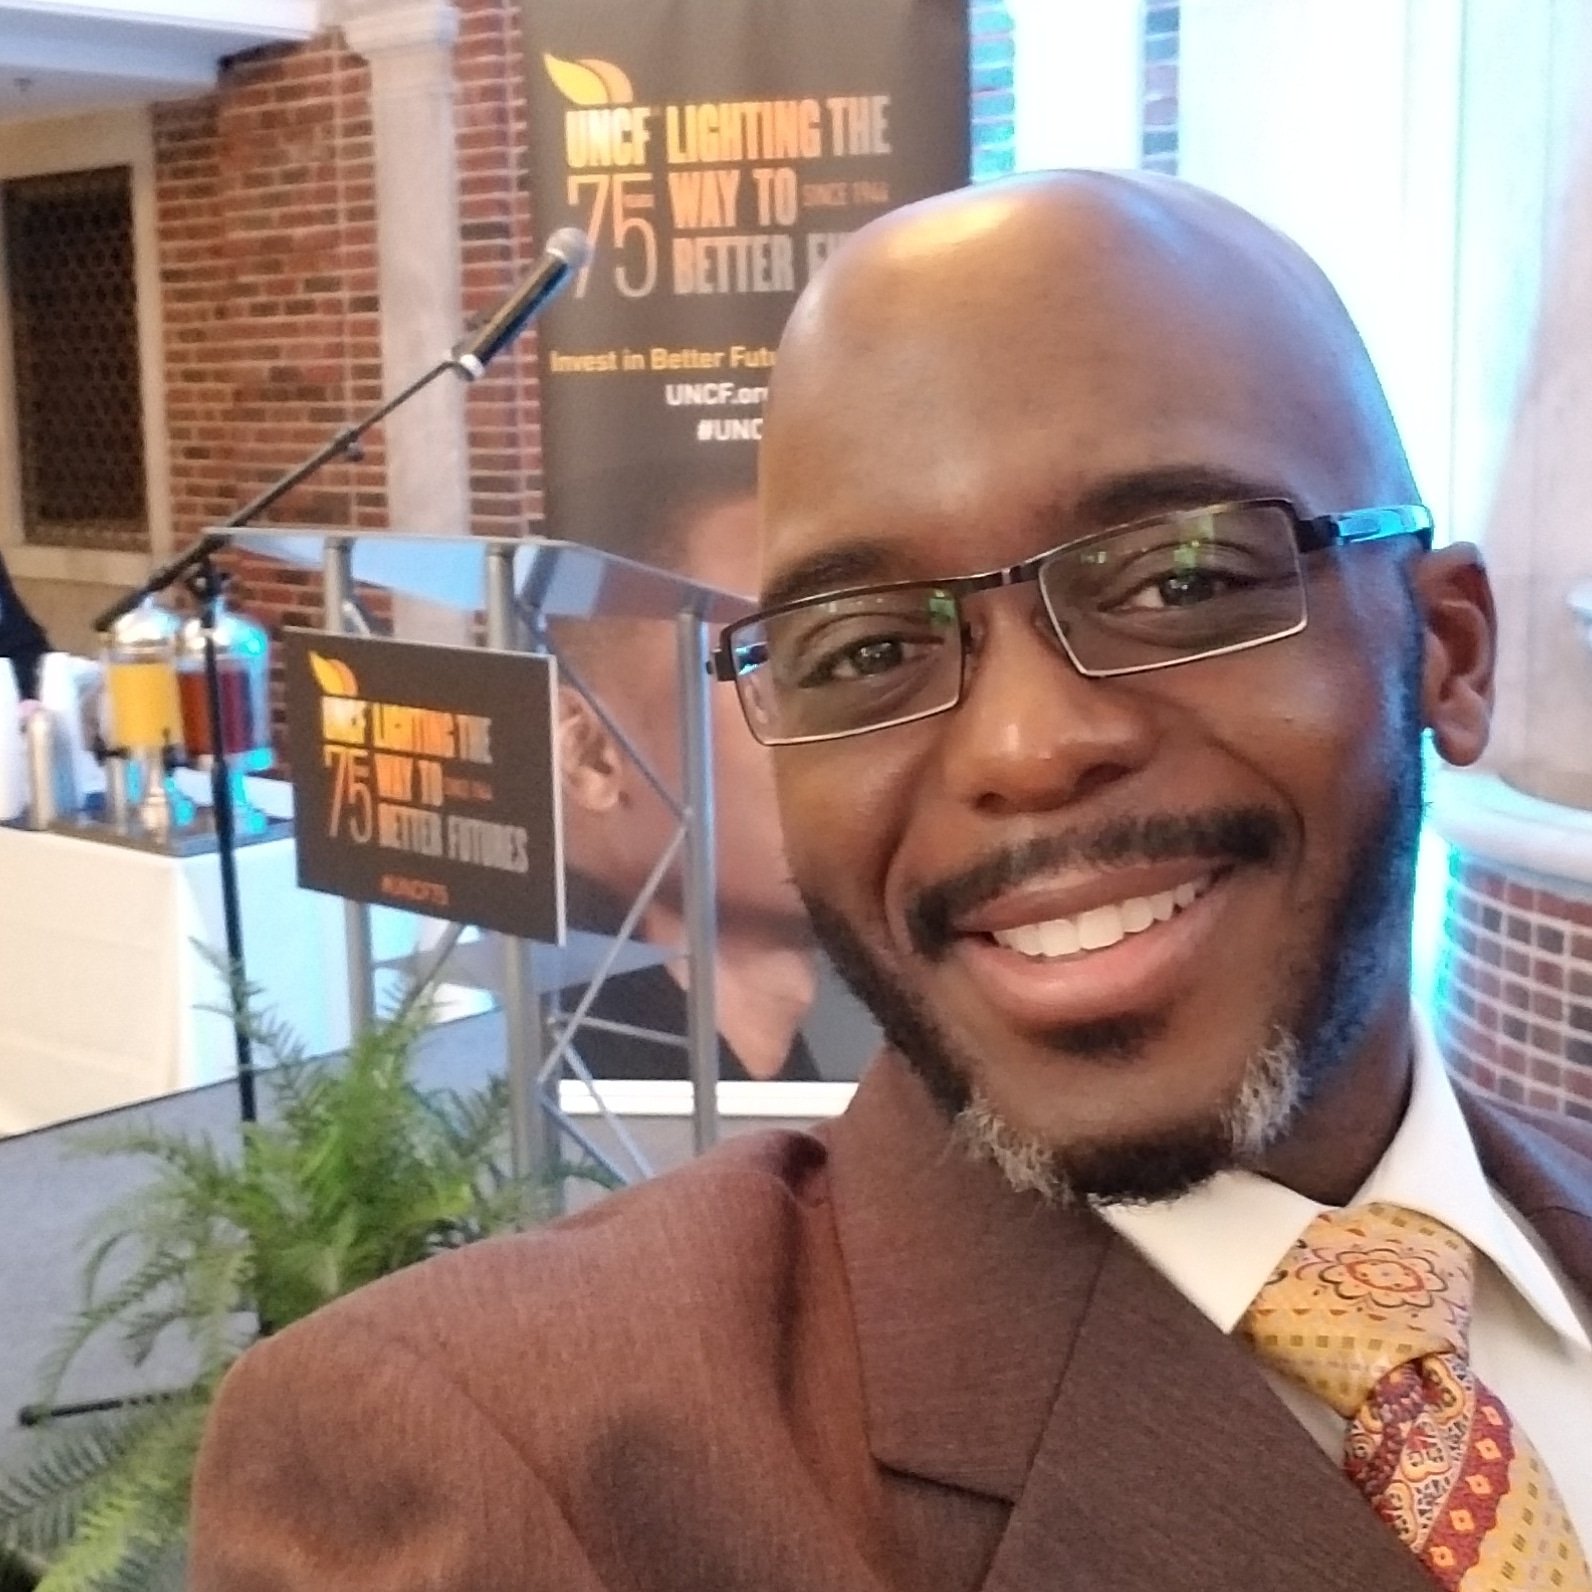 An Ice-Cold Brother and graduate of B-CU. Host of Another Look Television Show and educator for Cleveland Metropolitan School District. A friend to many.